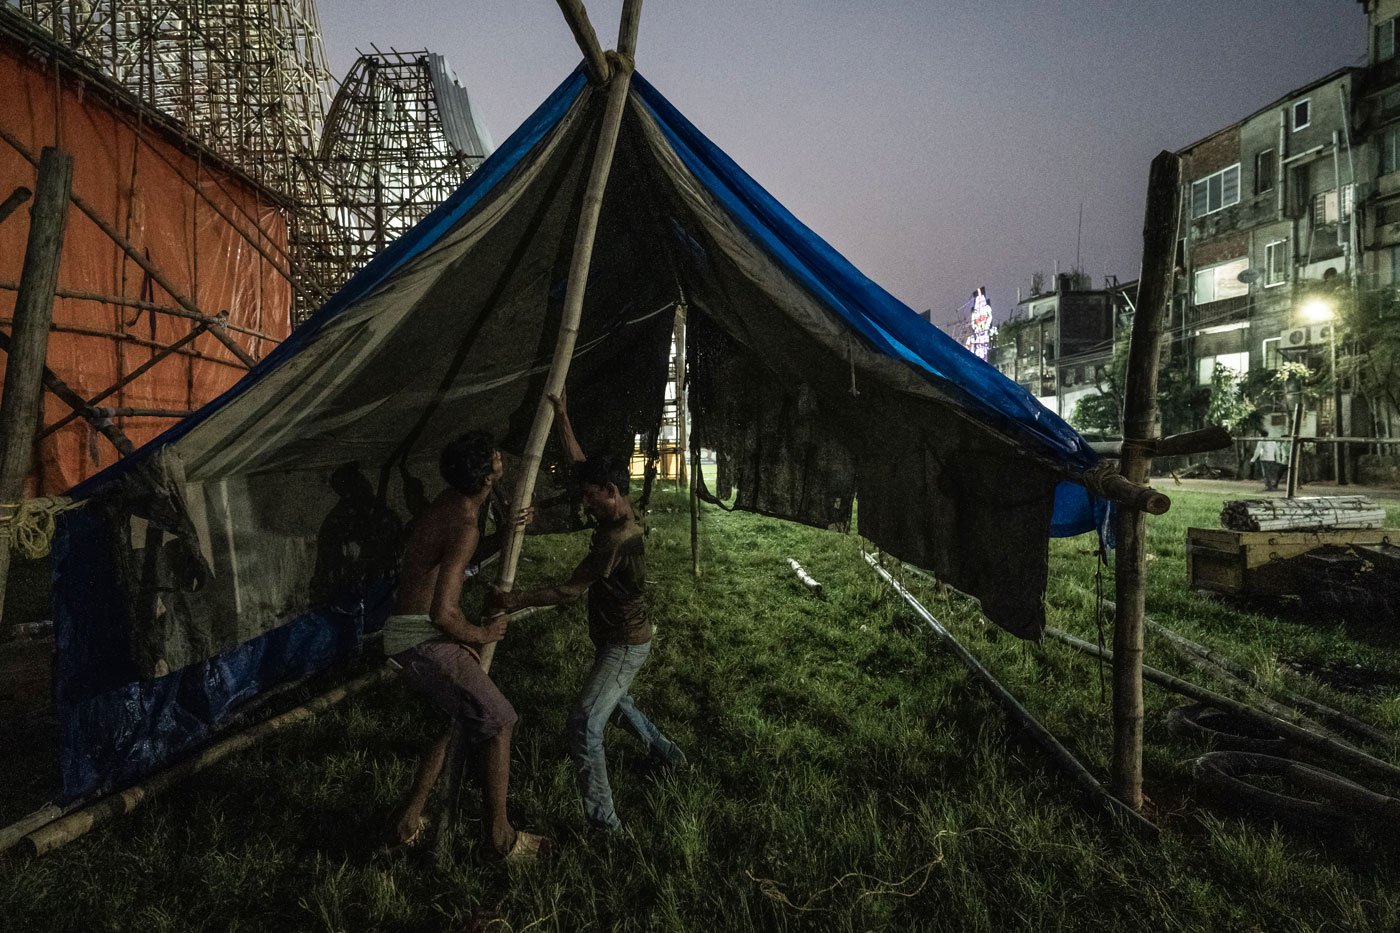 Jagga Ansari (right) sets up the tent right behind the puja pandal. This is where the group lives during the mela